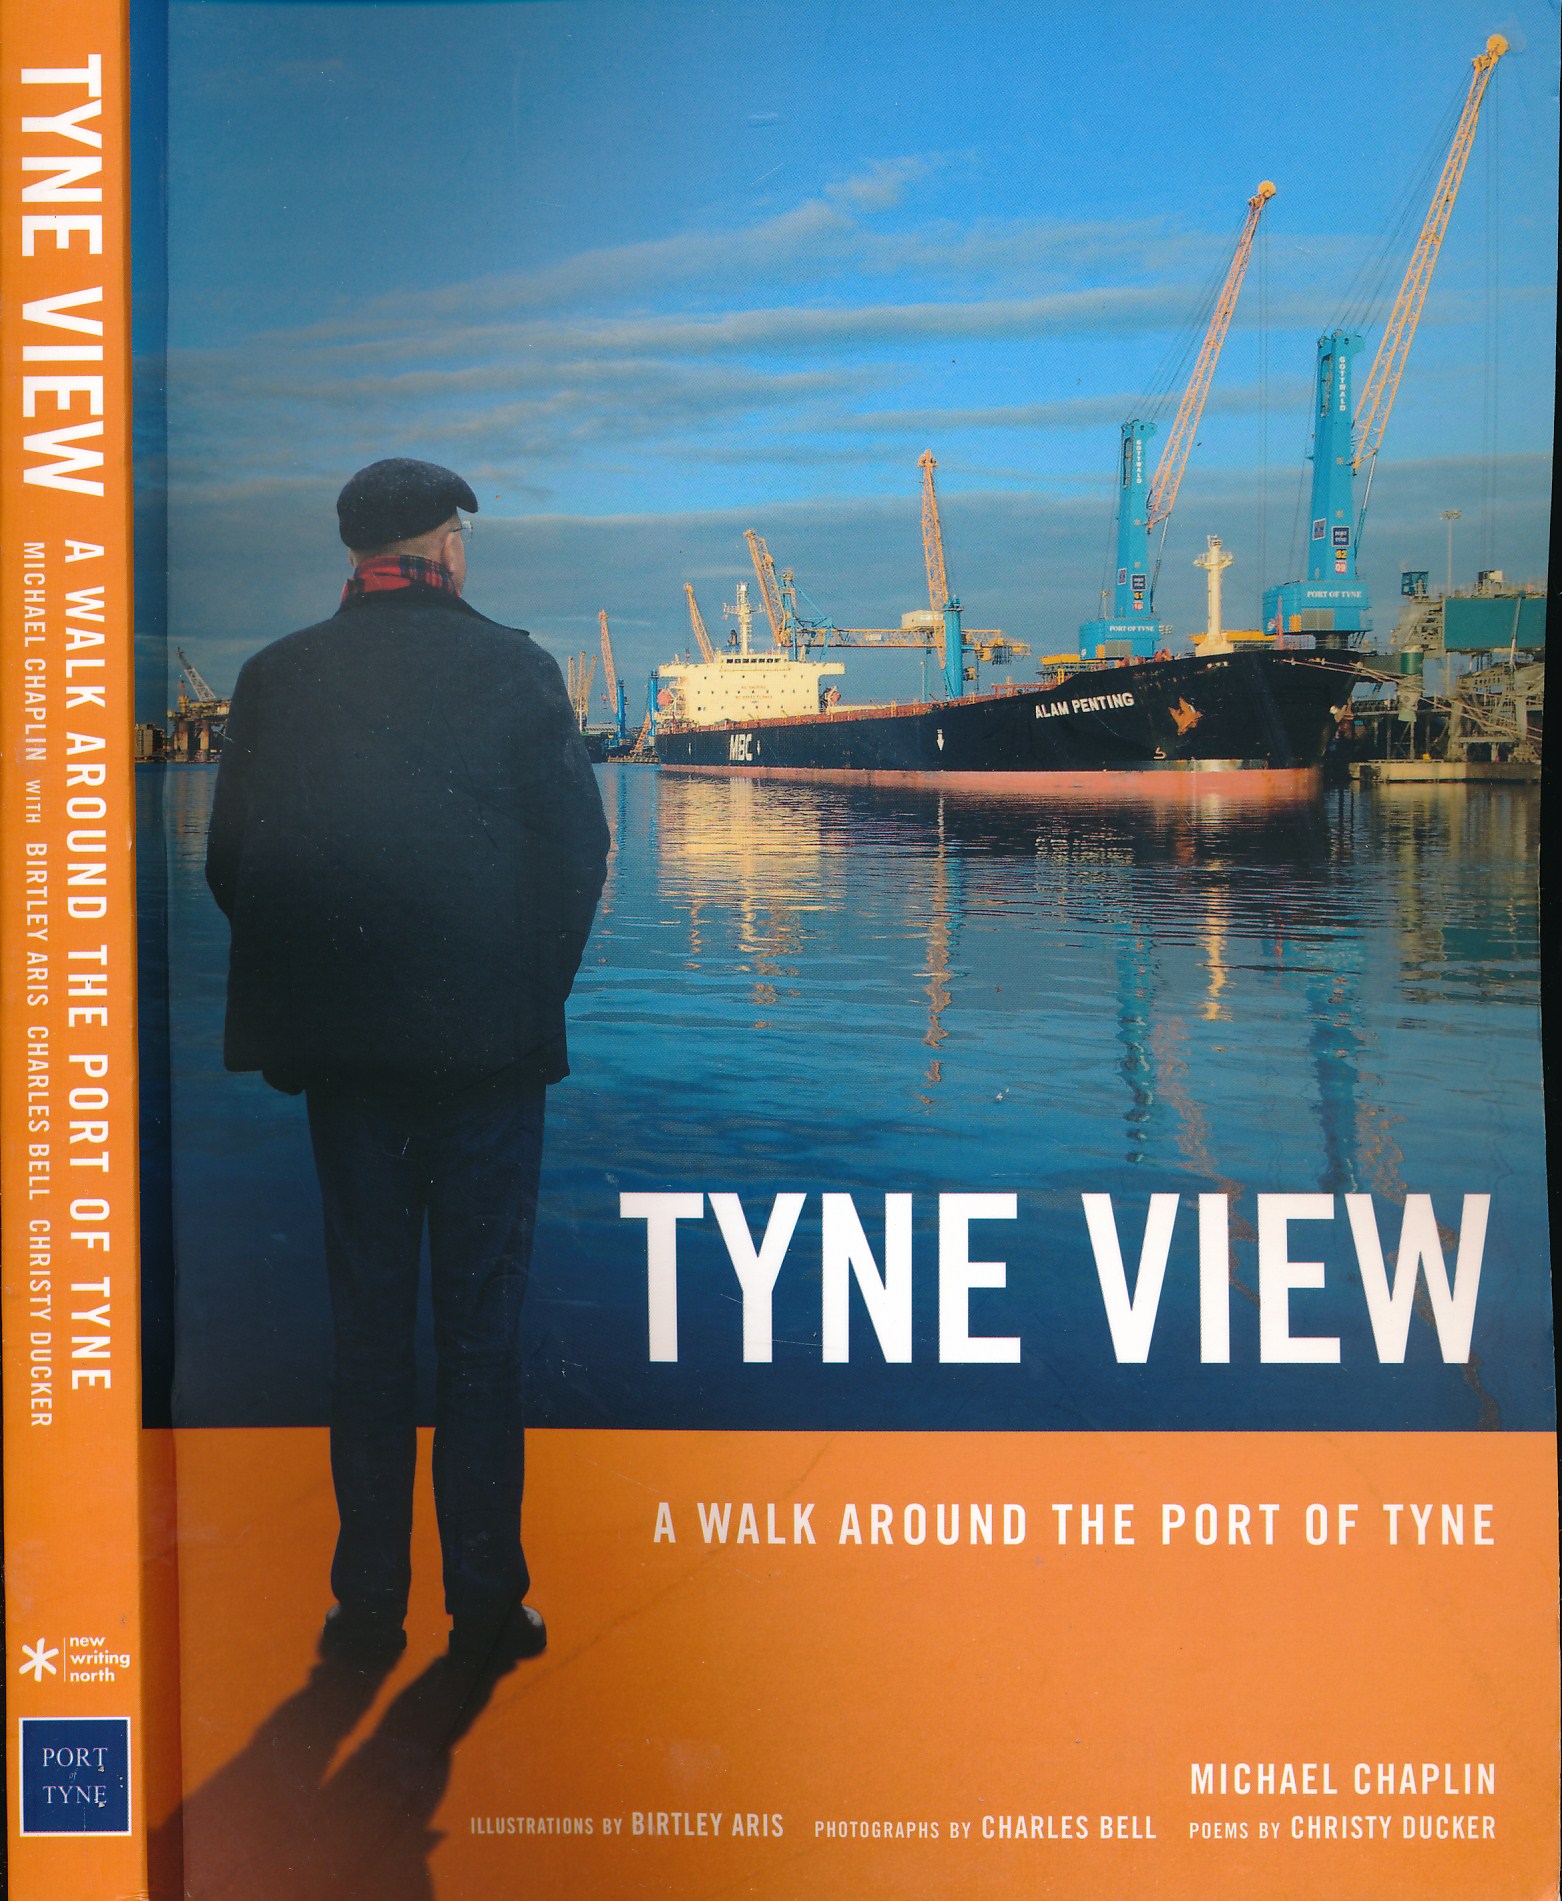 Tyne View. A Walk Around the Port of Tyne. Signed copy.